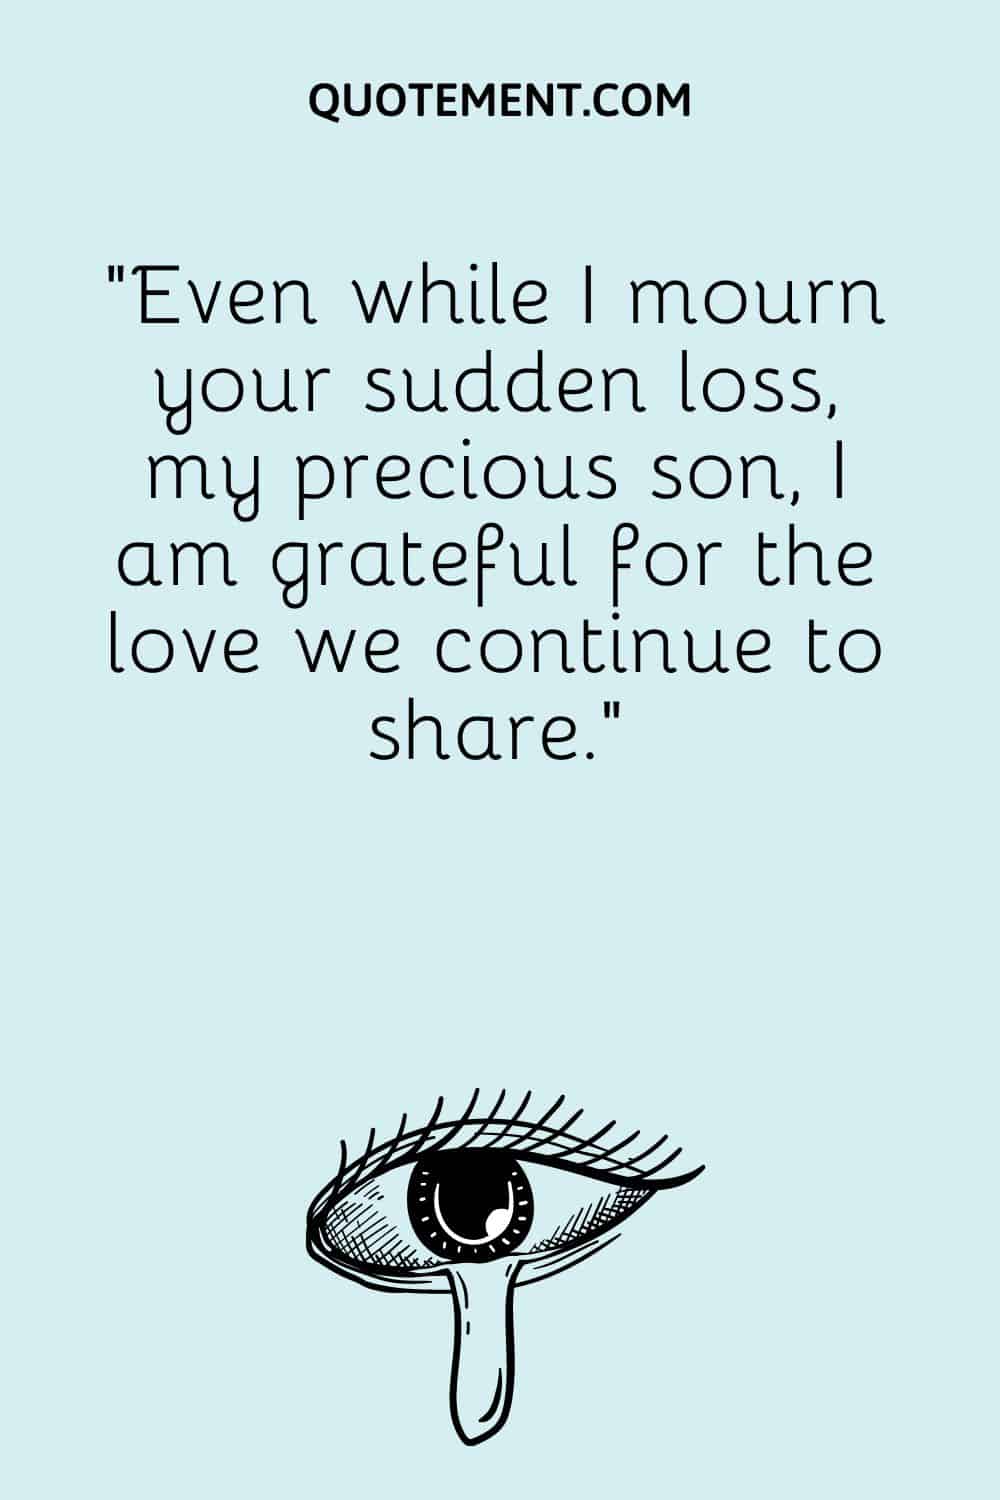 “Even while I mourn your sudden loss, my precious son, I am grateful for the love we continue to share.”